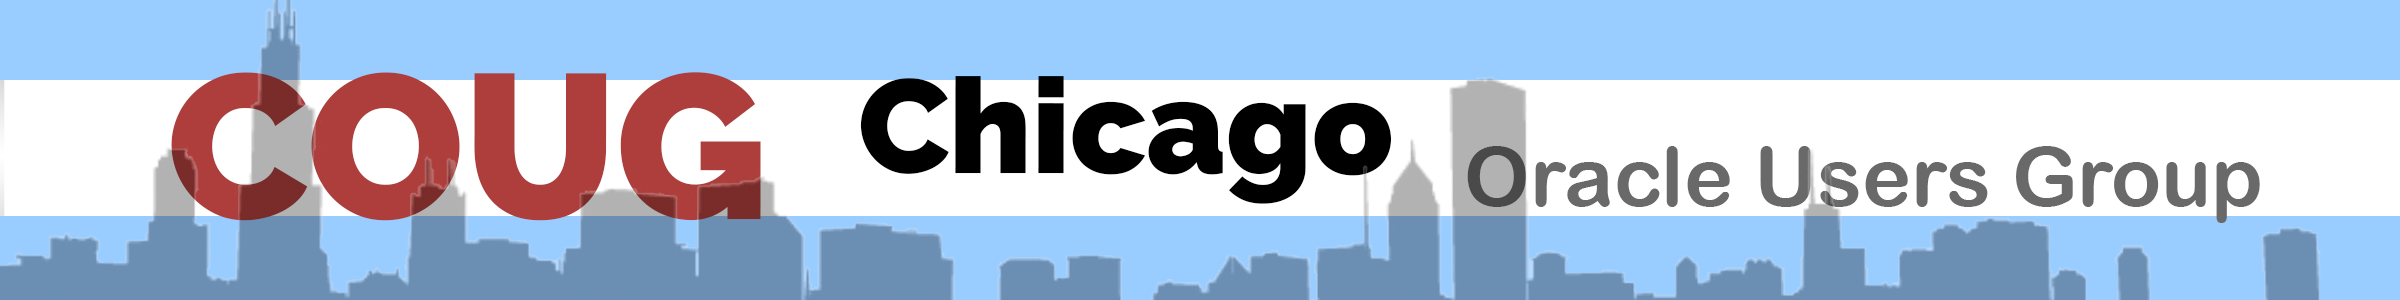 Chicago Oracle Users Group (COUG)